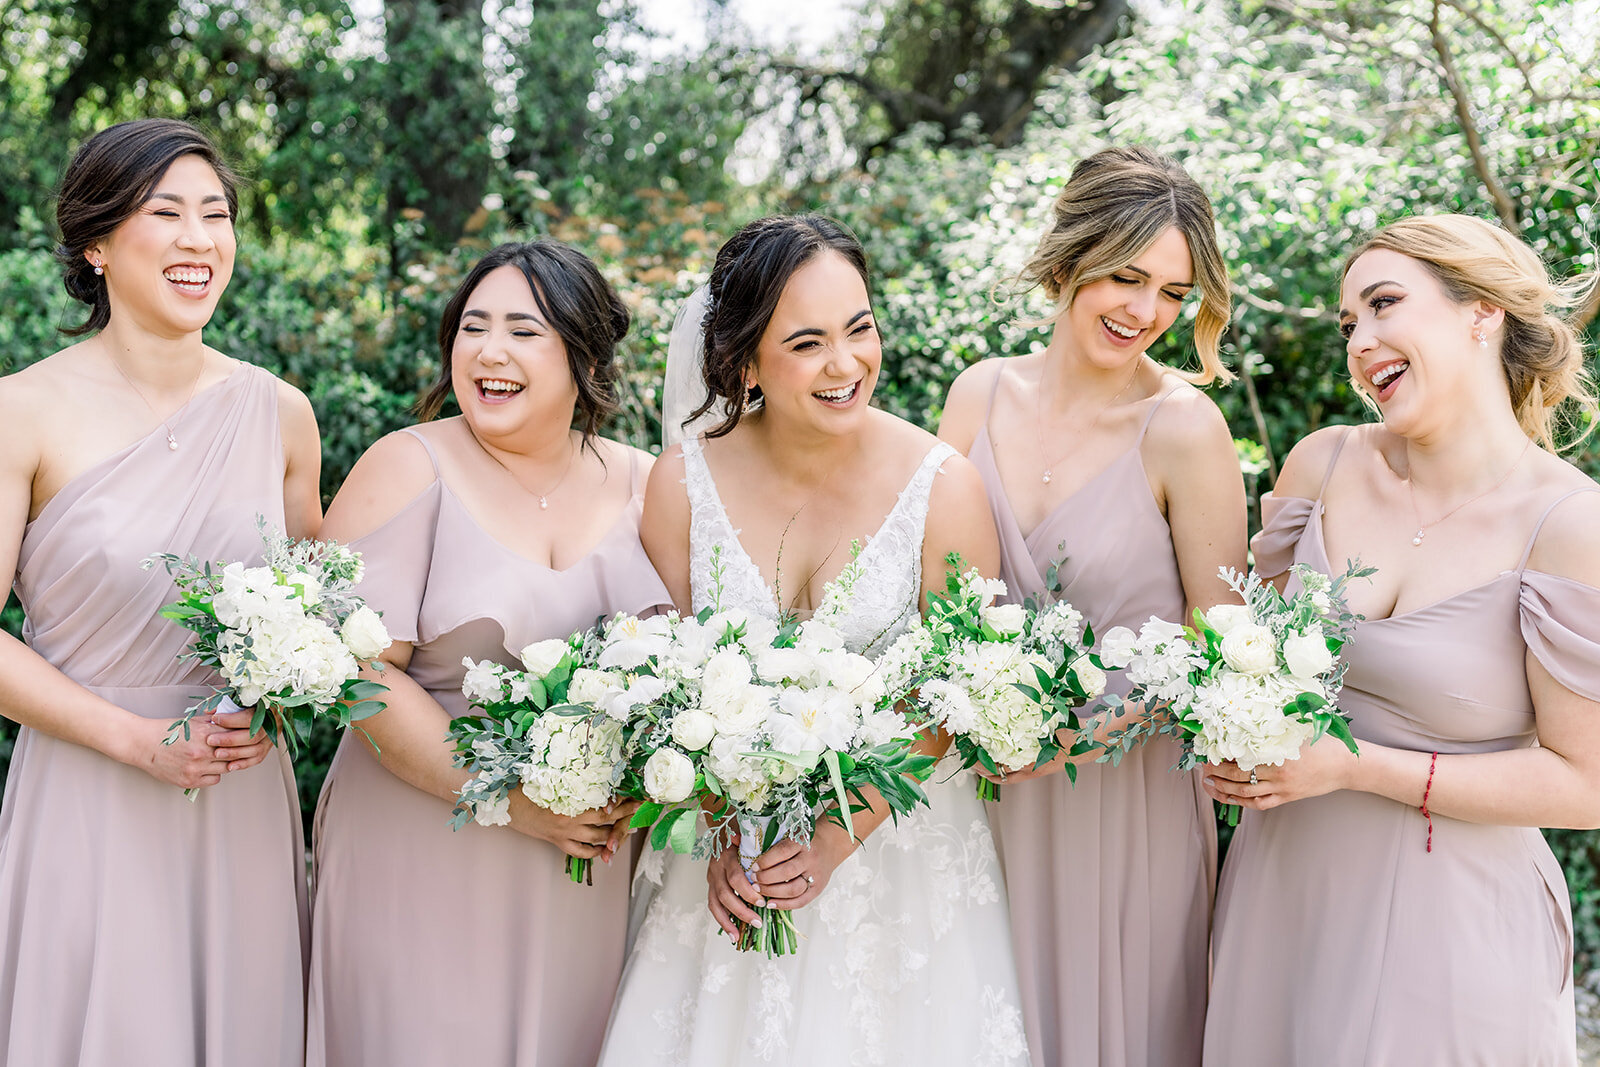 In this rustic yet elegant setting of Union Hill Inn in Sonora, CA, Tiffany Longeway captures the warmth and charm of a countryside wedding, blending natural beauty with sophisticated details.